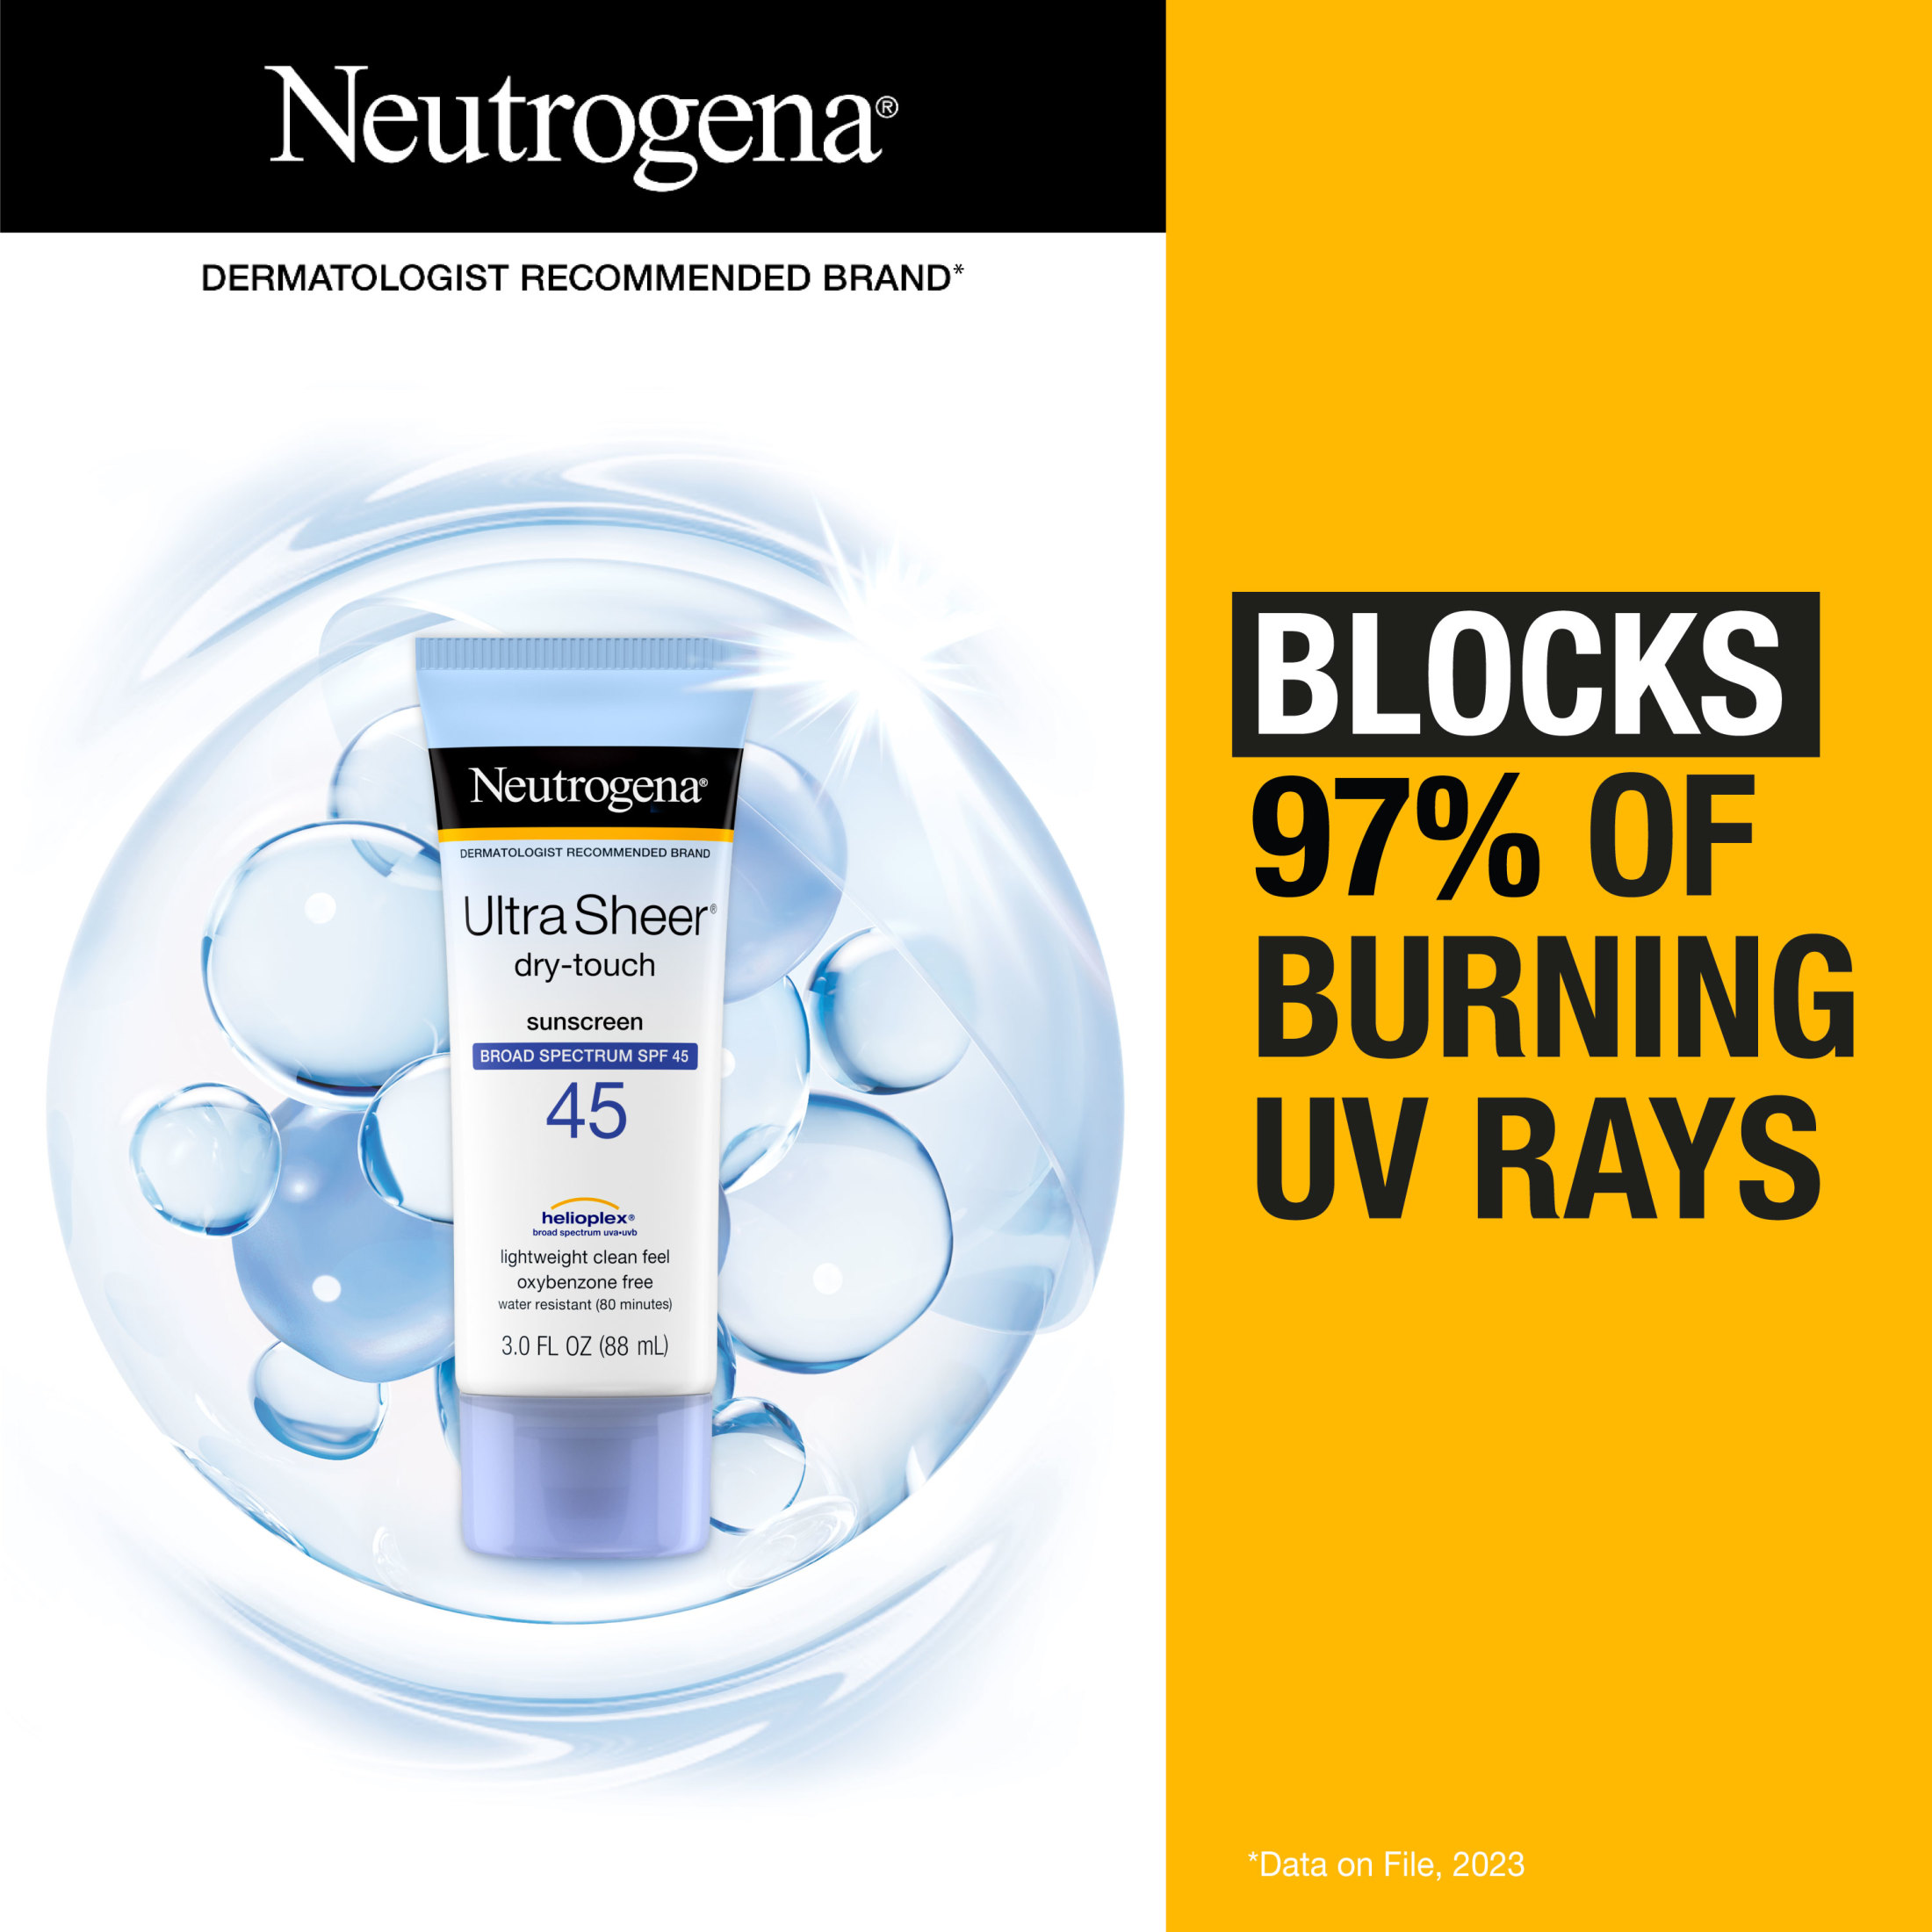 Neutrogena Ultra Sheer Dry-Touch SPF 45 Sunscreen Lotion, 3 fl. oz - image 3 of 9